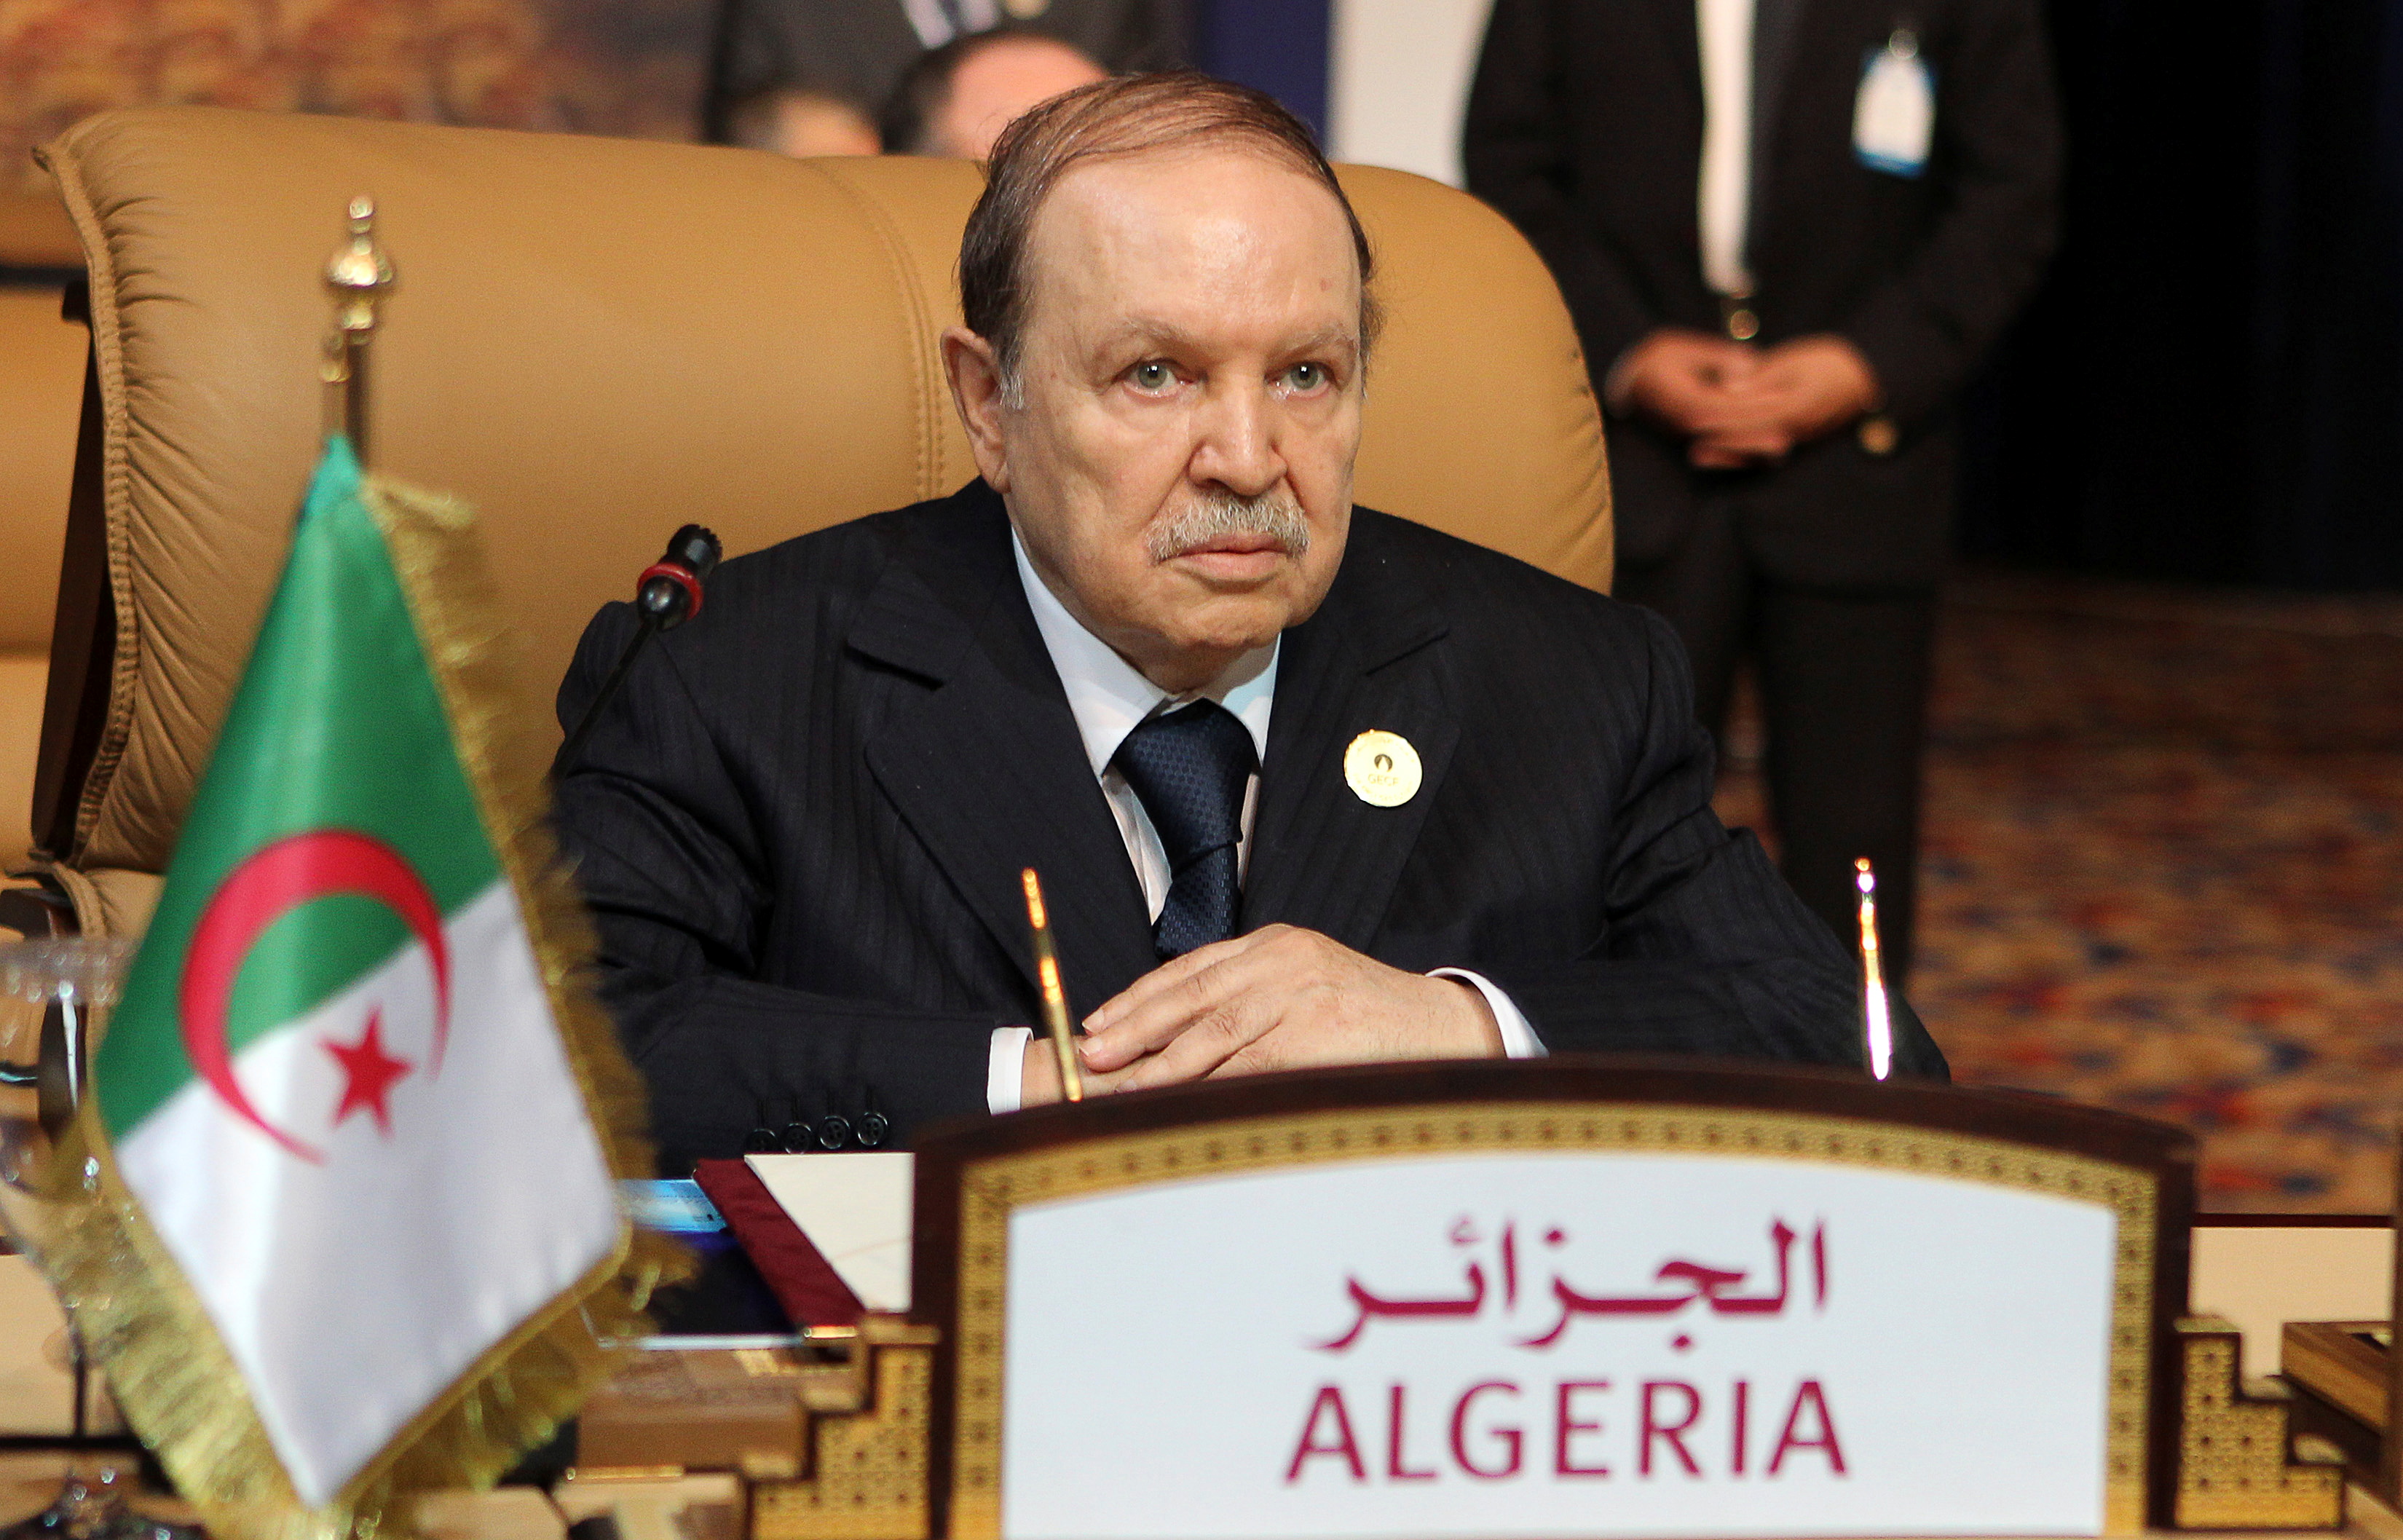 Algerian President Abdelaziz Bouteflika attends the opening session of the first Gas Exporting Countries Forum summit in Doha November 15, 2011.   REUTERS/Mohammed Dabbous/File Photo